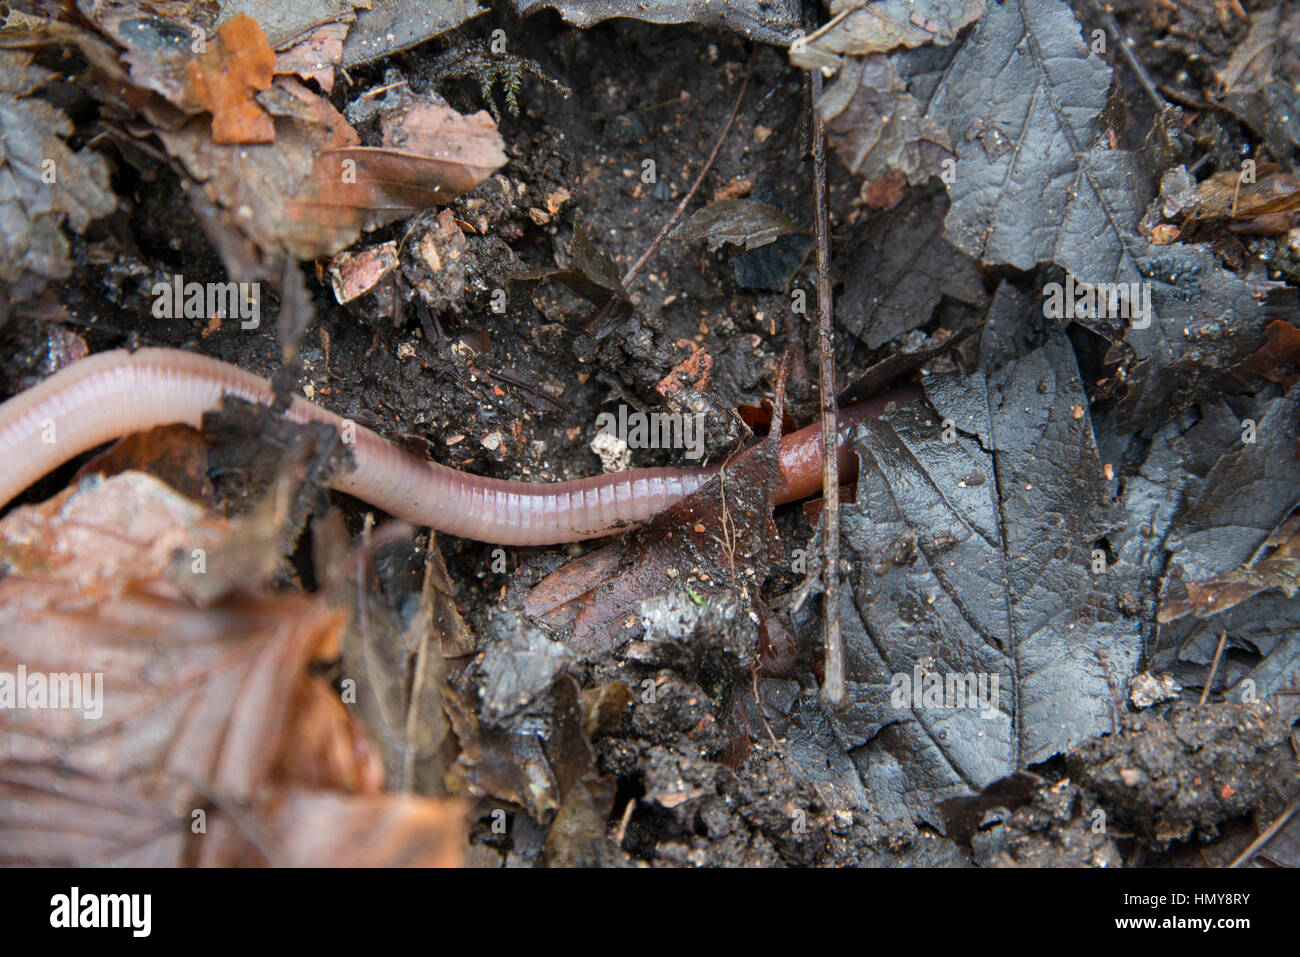 An earthworm crawling over some leaves Stock Photo